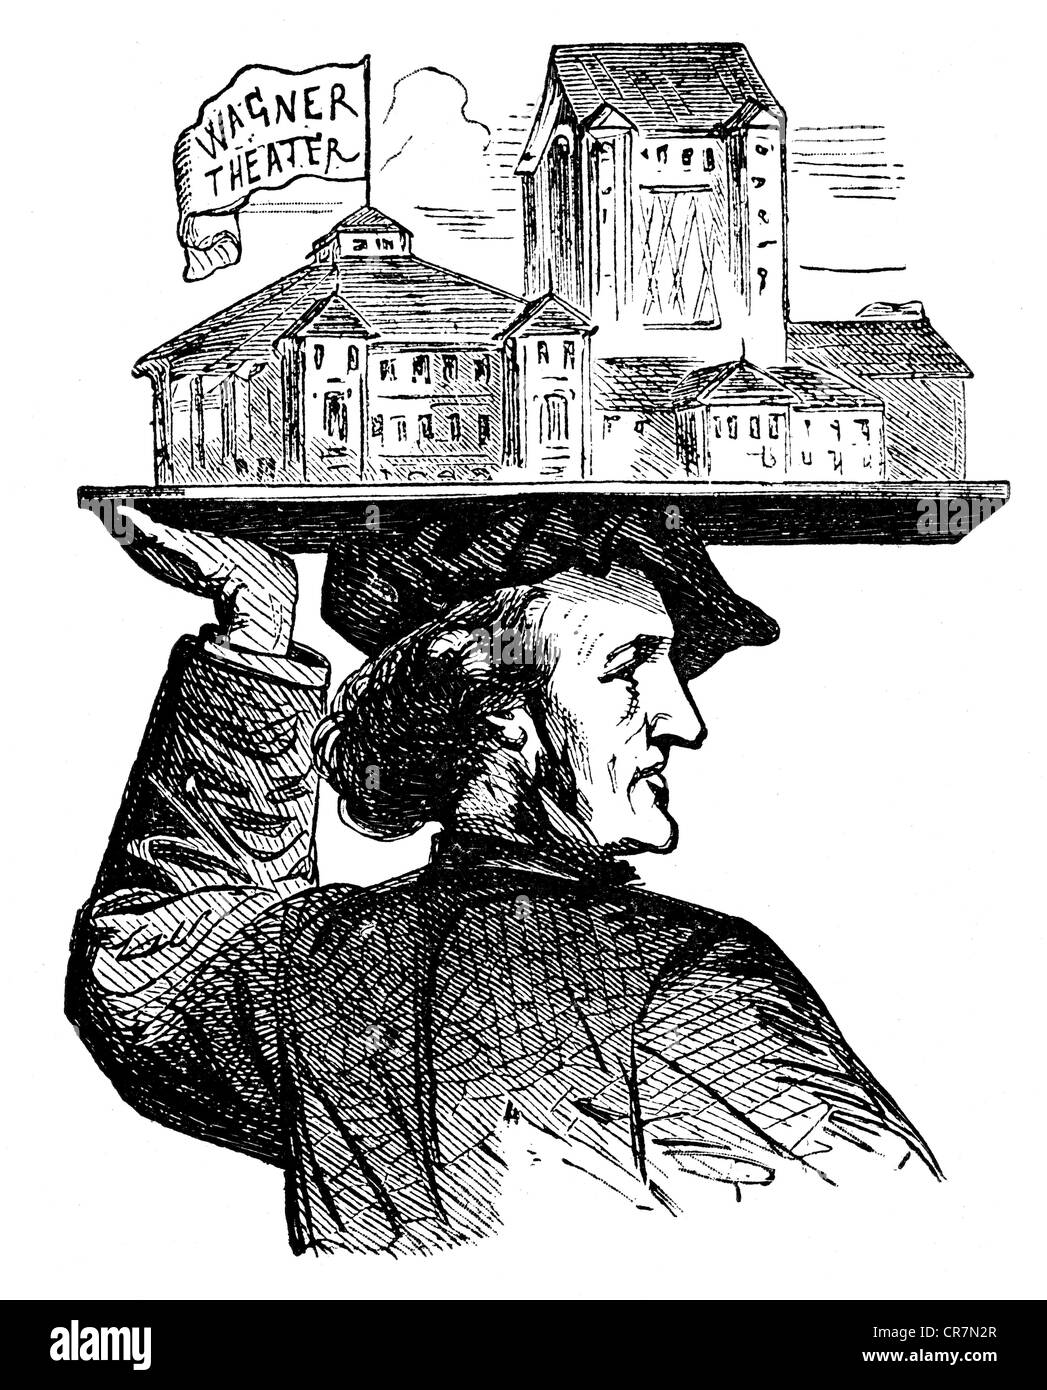 Wagner, Richard, 22.5.1813 - 13.2.1883, German composer, balancing theatre building on his head, caricature, by H. König, wood engraving, 1873, Stock Photo